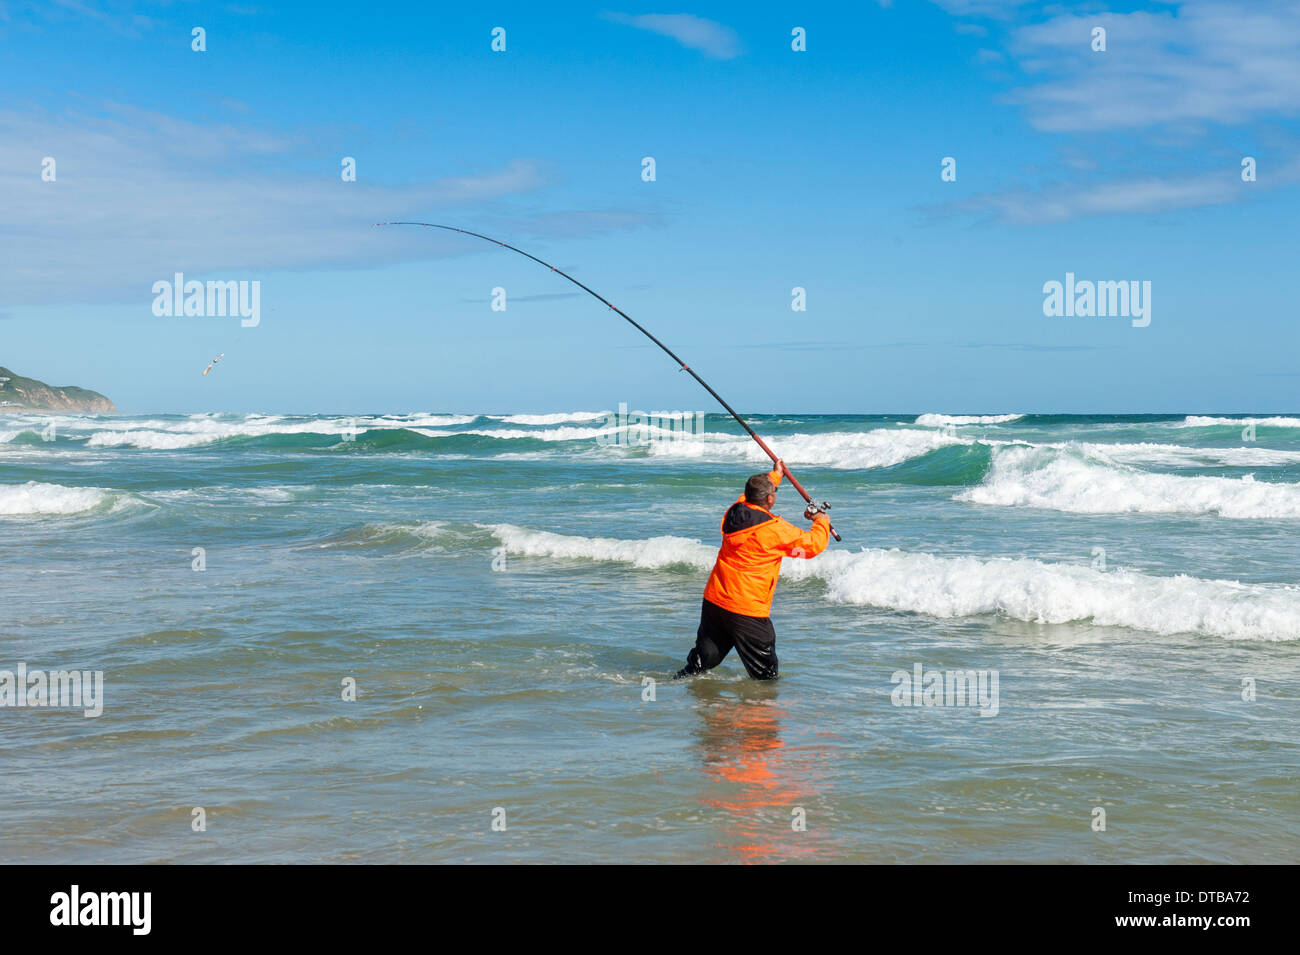 Fisherman casting a fishing rod standing in breaking waves, Sedgefield, Eastern Cape, South Africa Stock Photo